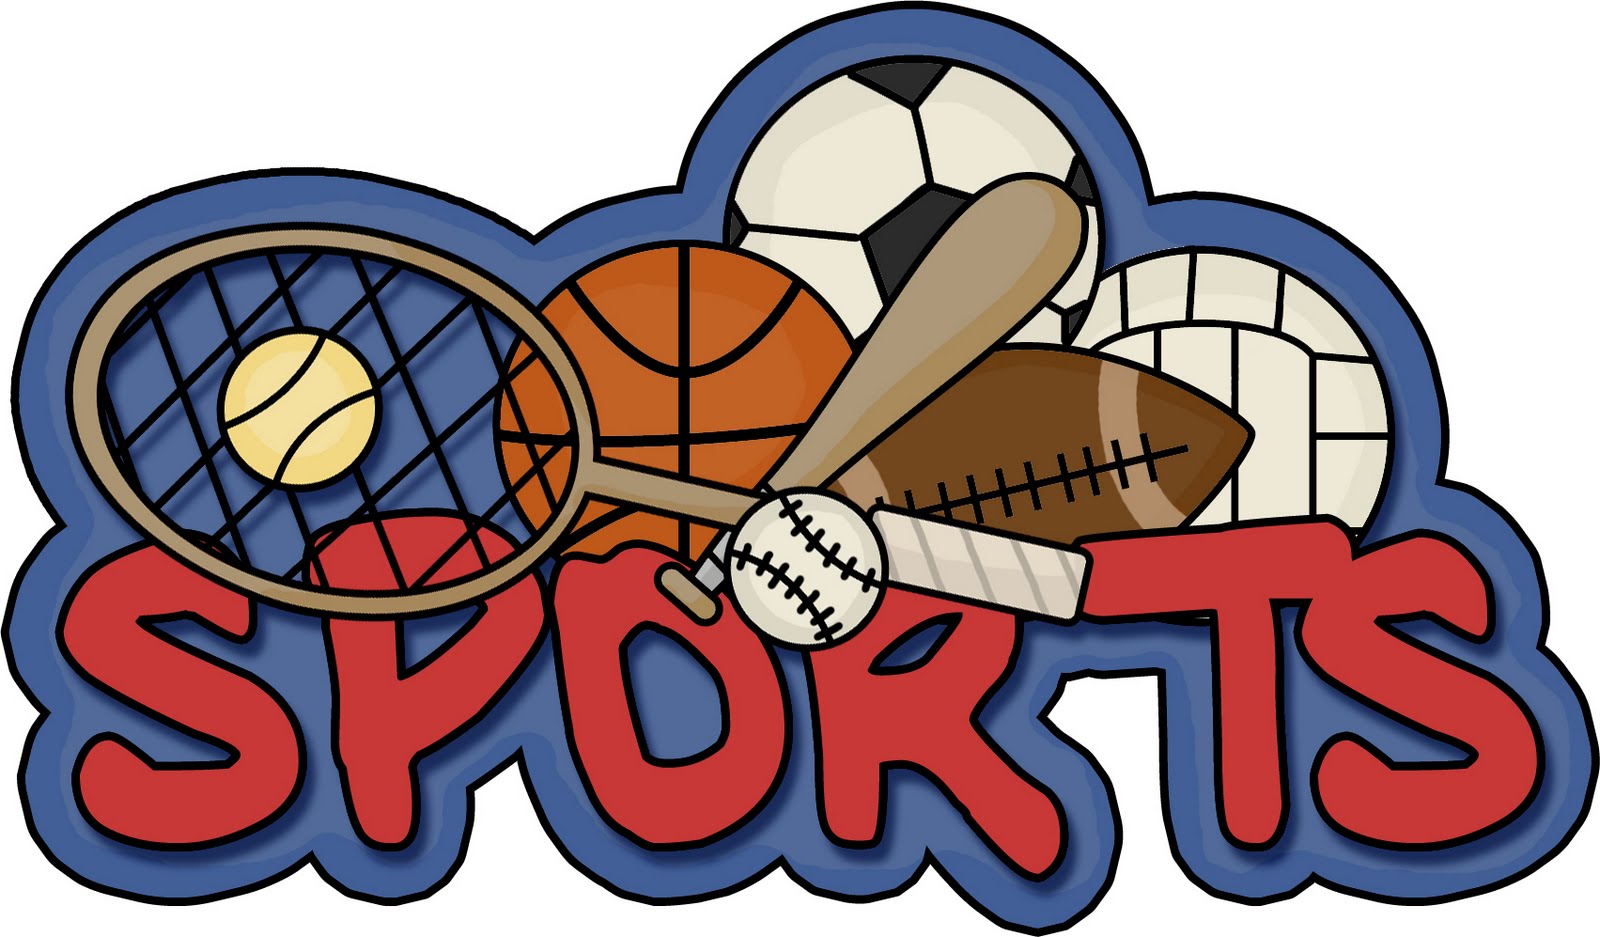 free-sport-word-cliparts-download-free-sport-word-cliparts-png-images-free-cliparts-on-clipart